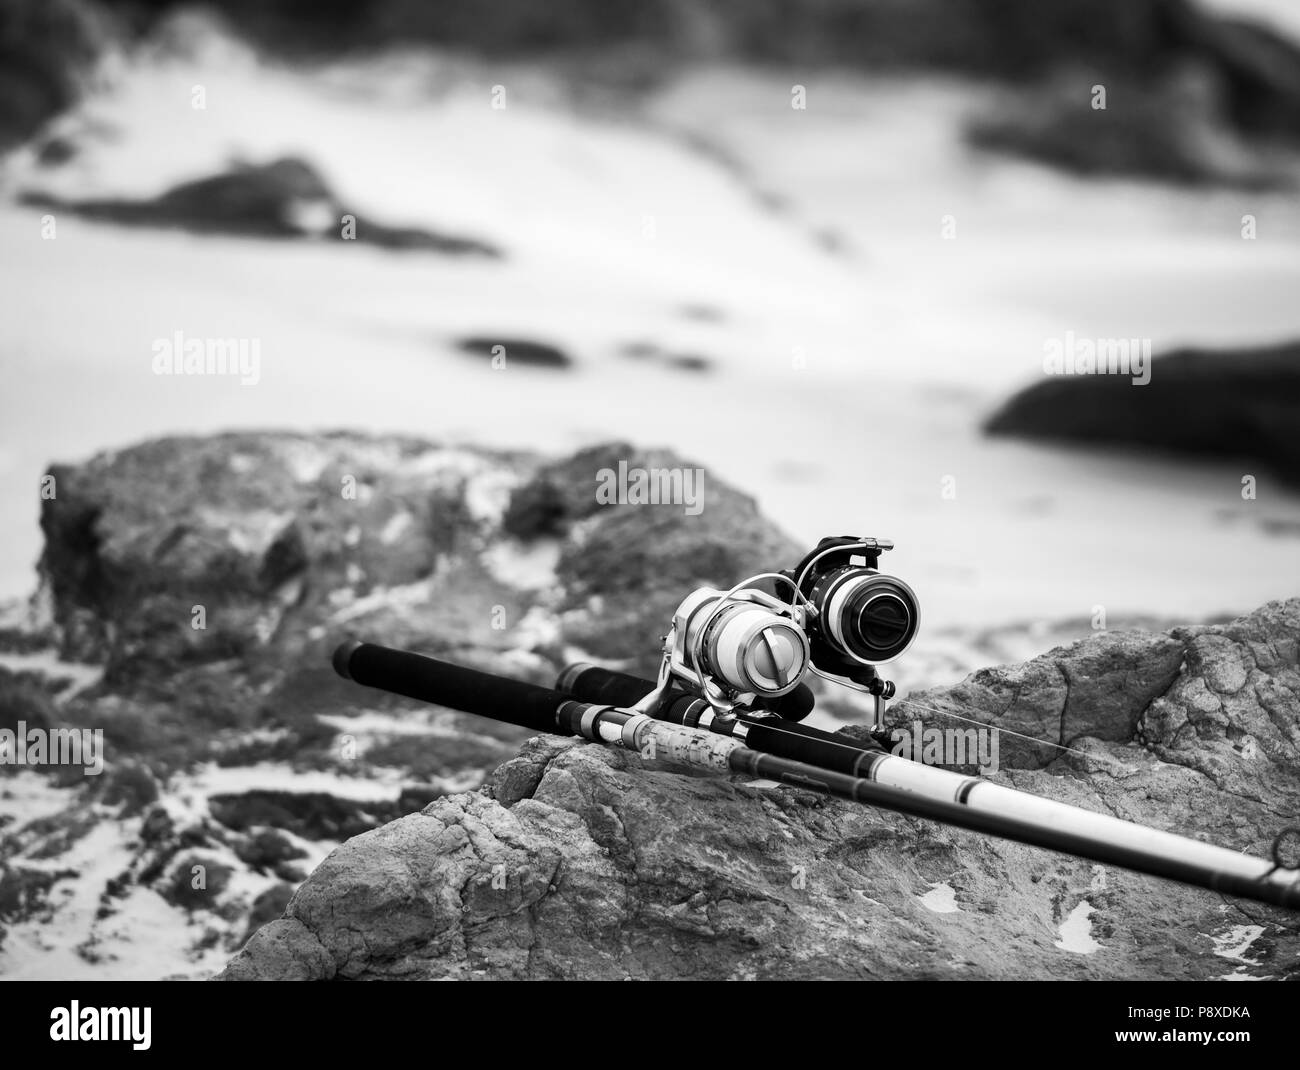 Fishing rods for surf fishing sitting on rocks at the beach in black and white Stock Photo